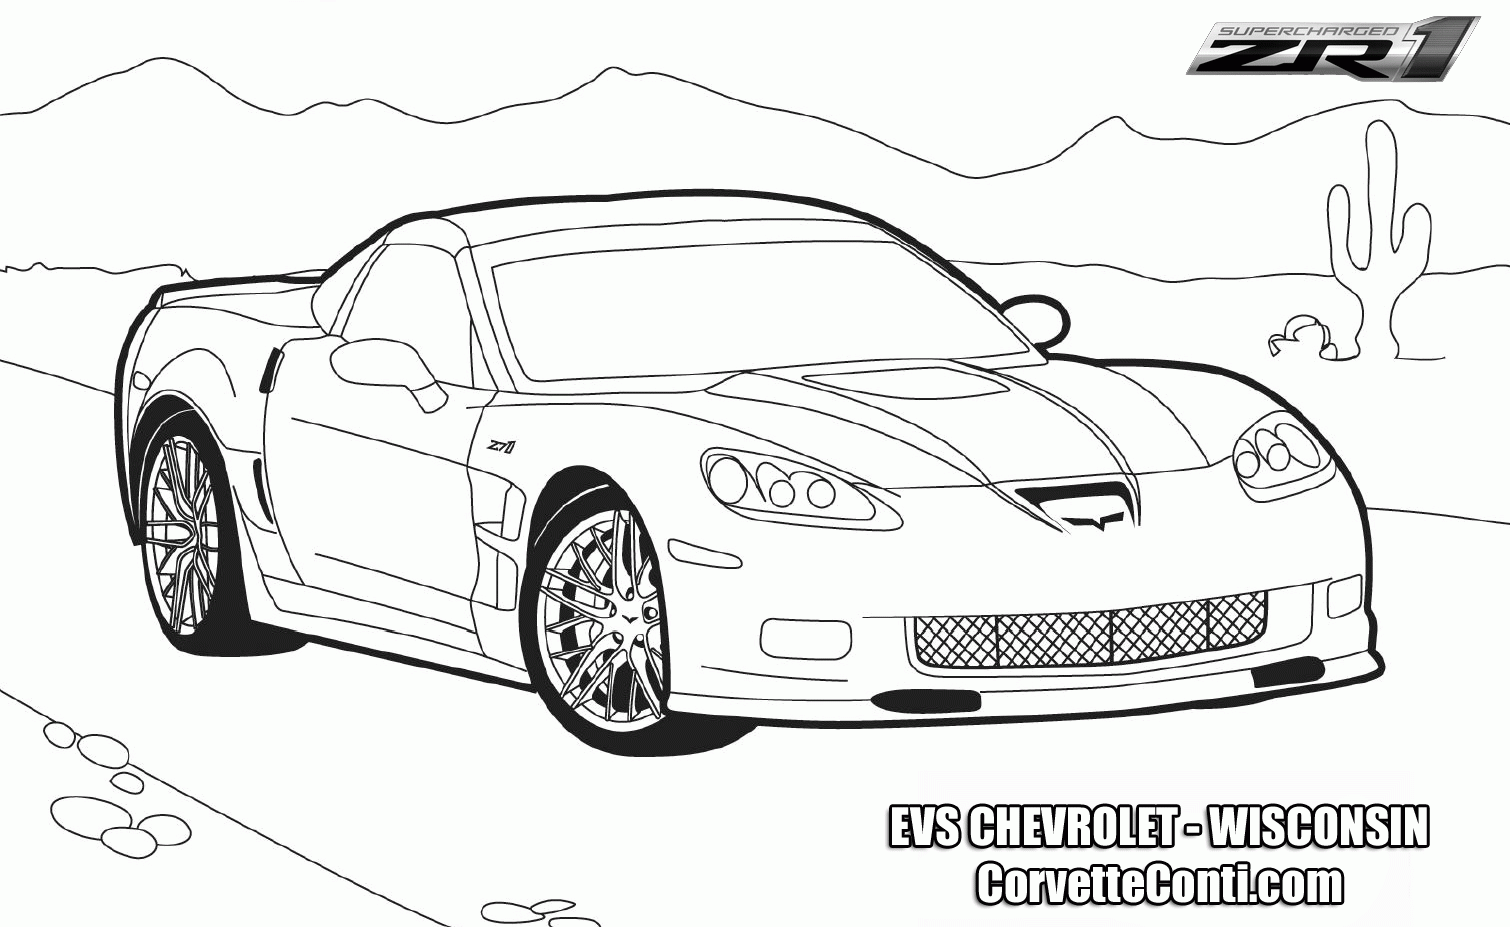 Corvette coloring pages to download and print for free